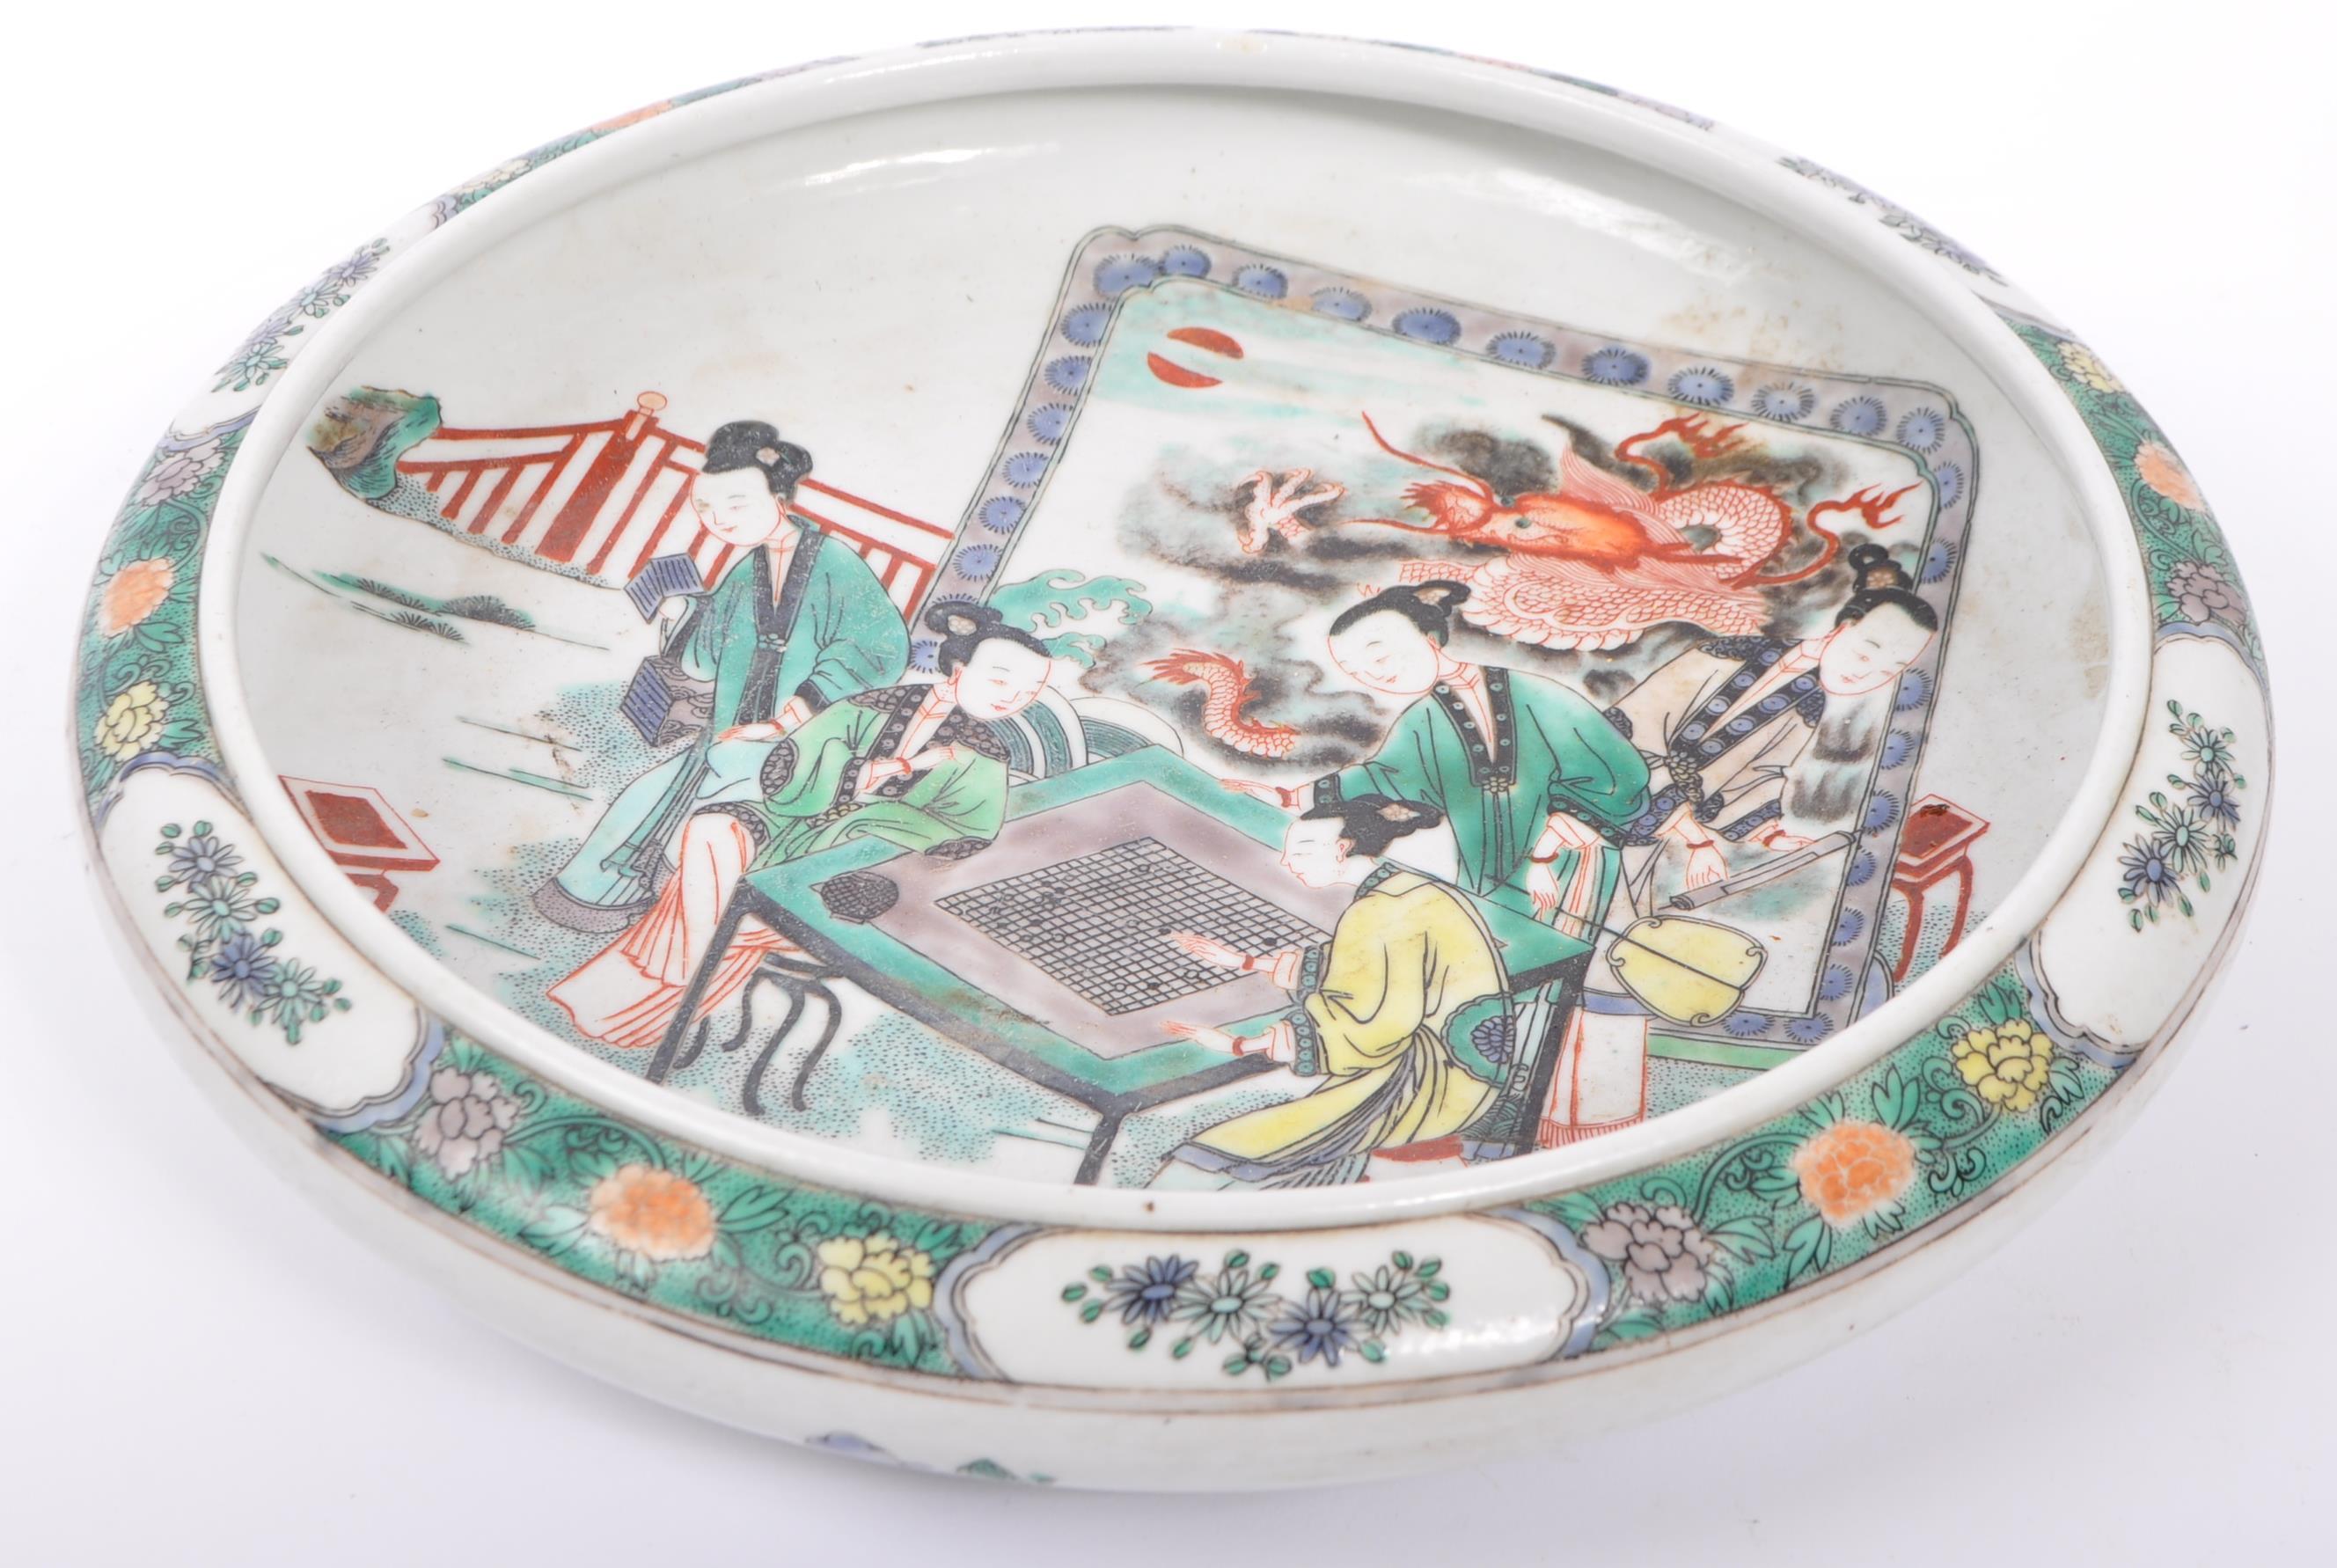 EARLY 20TH CENTURY CHINESE PORCELAIN BOWL - Image 2 of 5